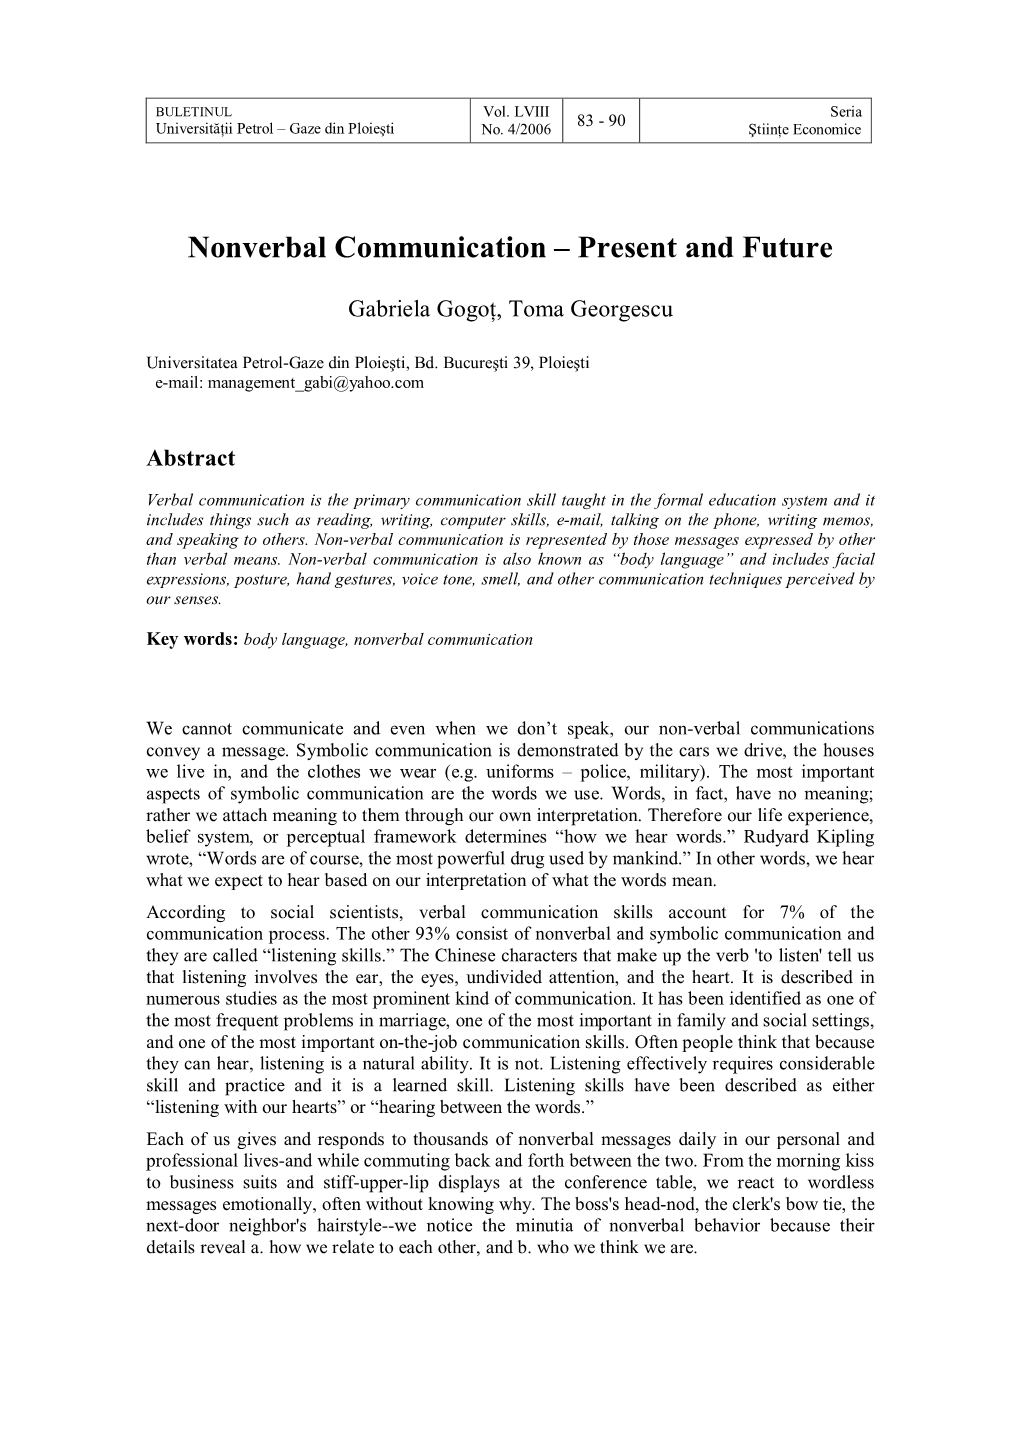 Nonverbal Communication – Present and Future